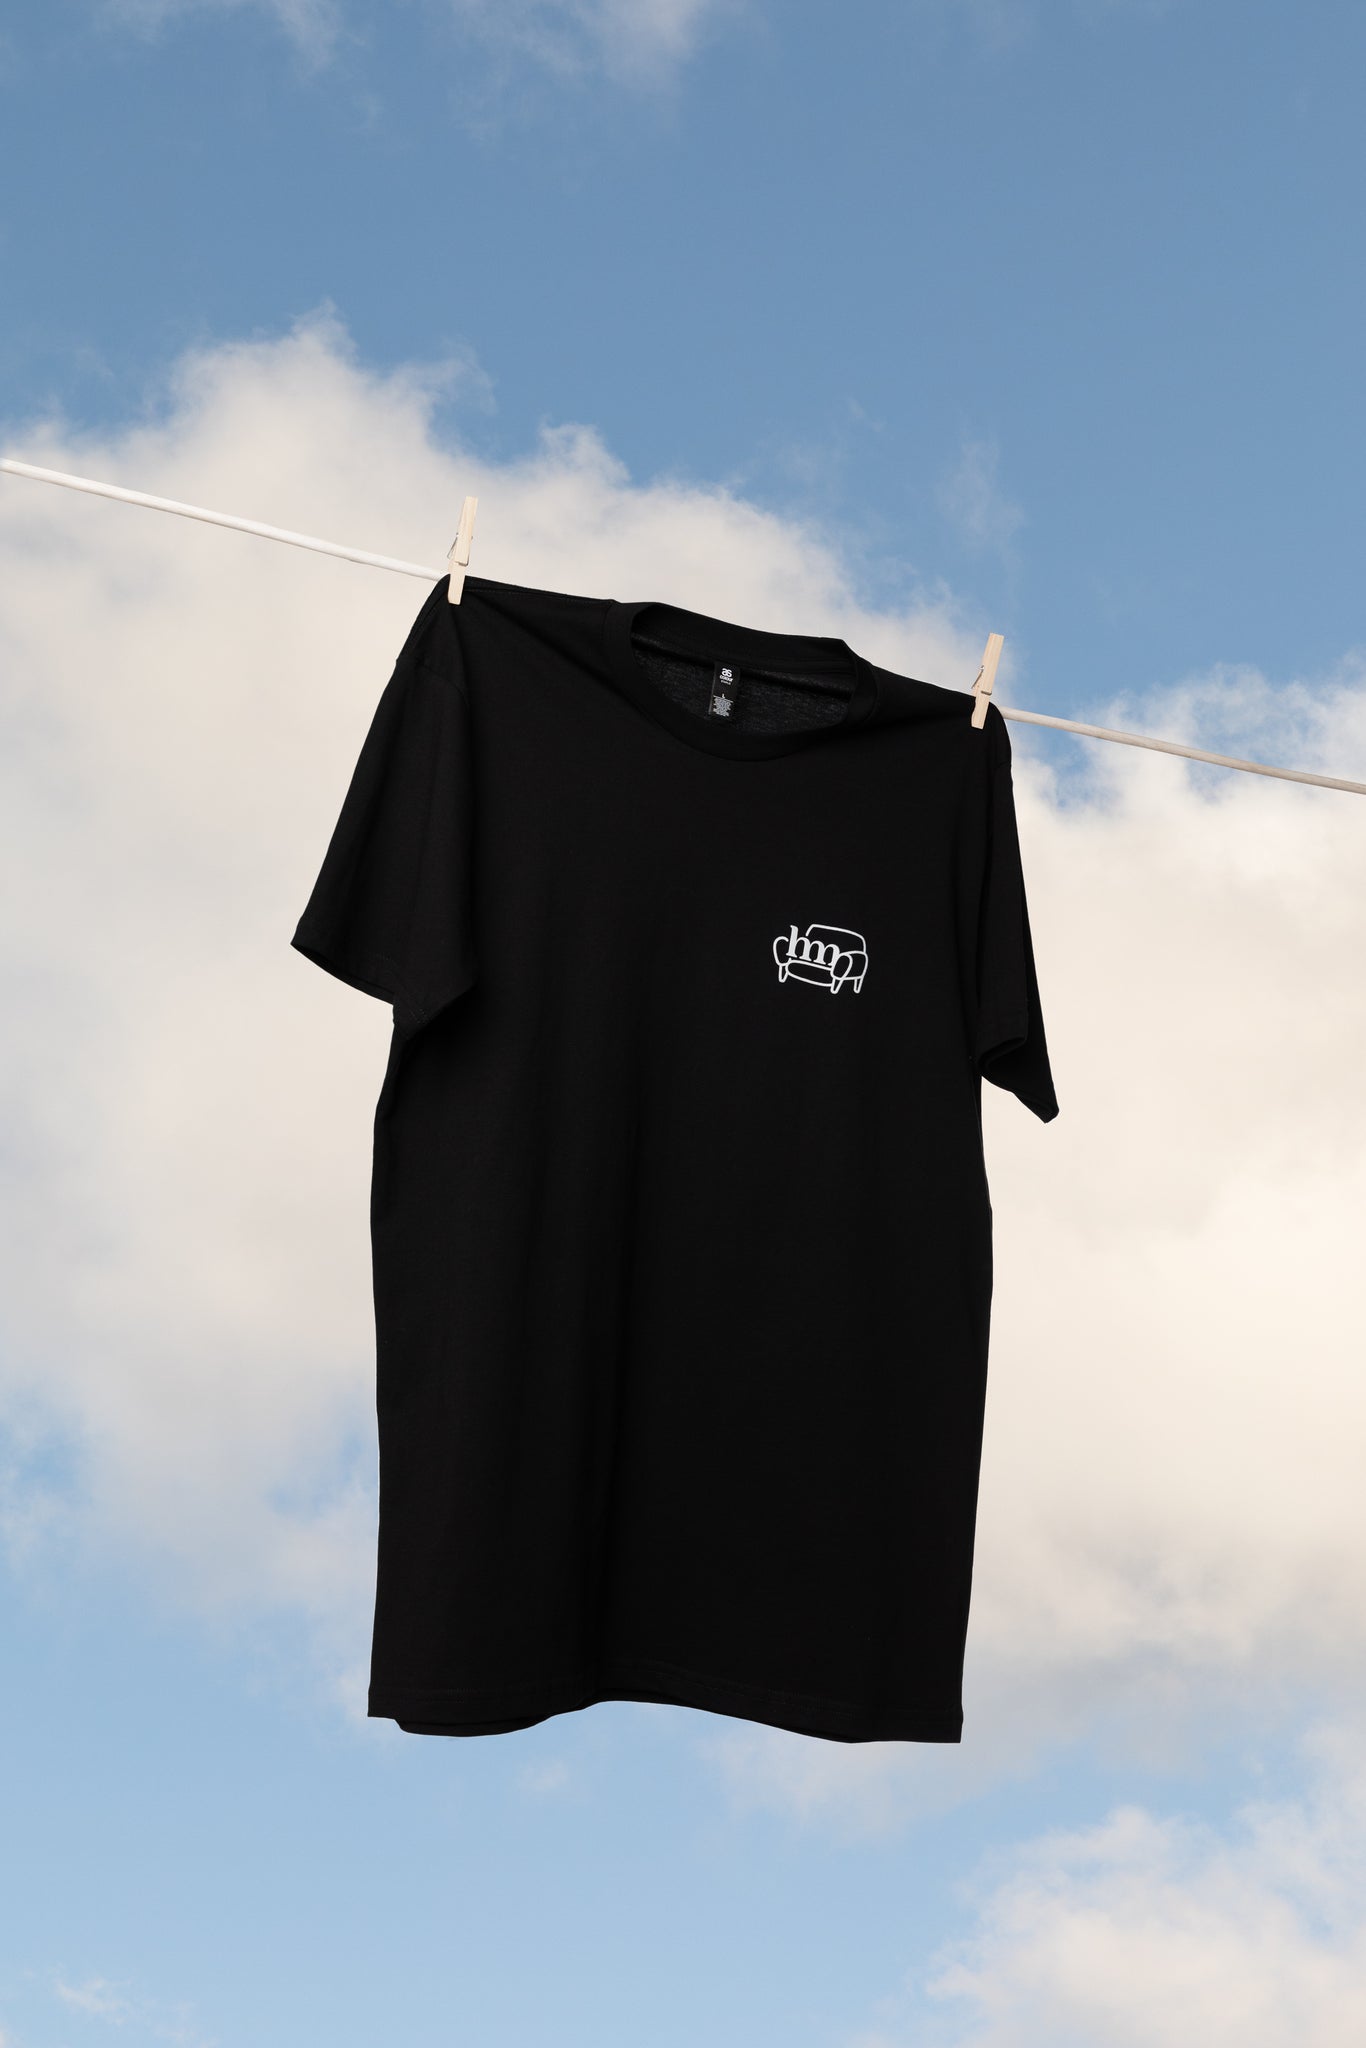 Housemates Tee - 'Couch Surfer' Black